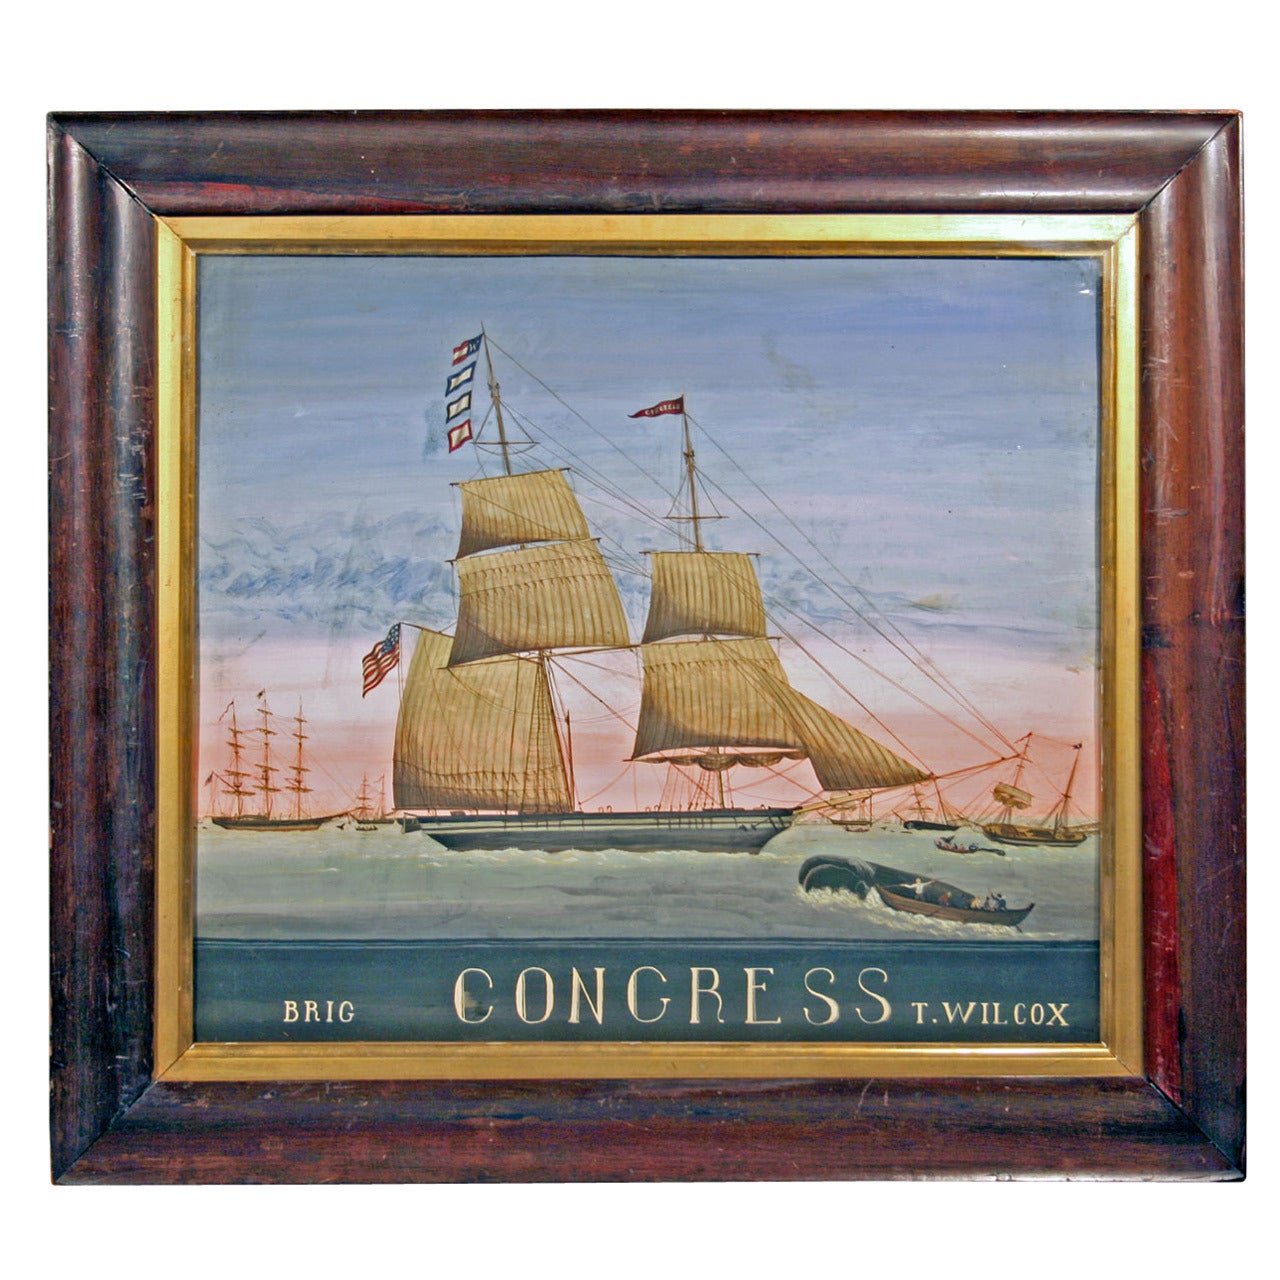 Whaling Scene Painting with American "Brig Congress T. Wilcox"